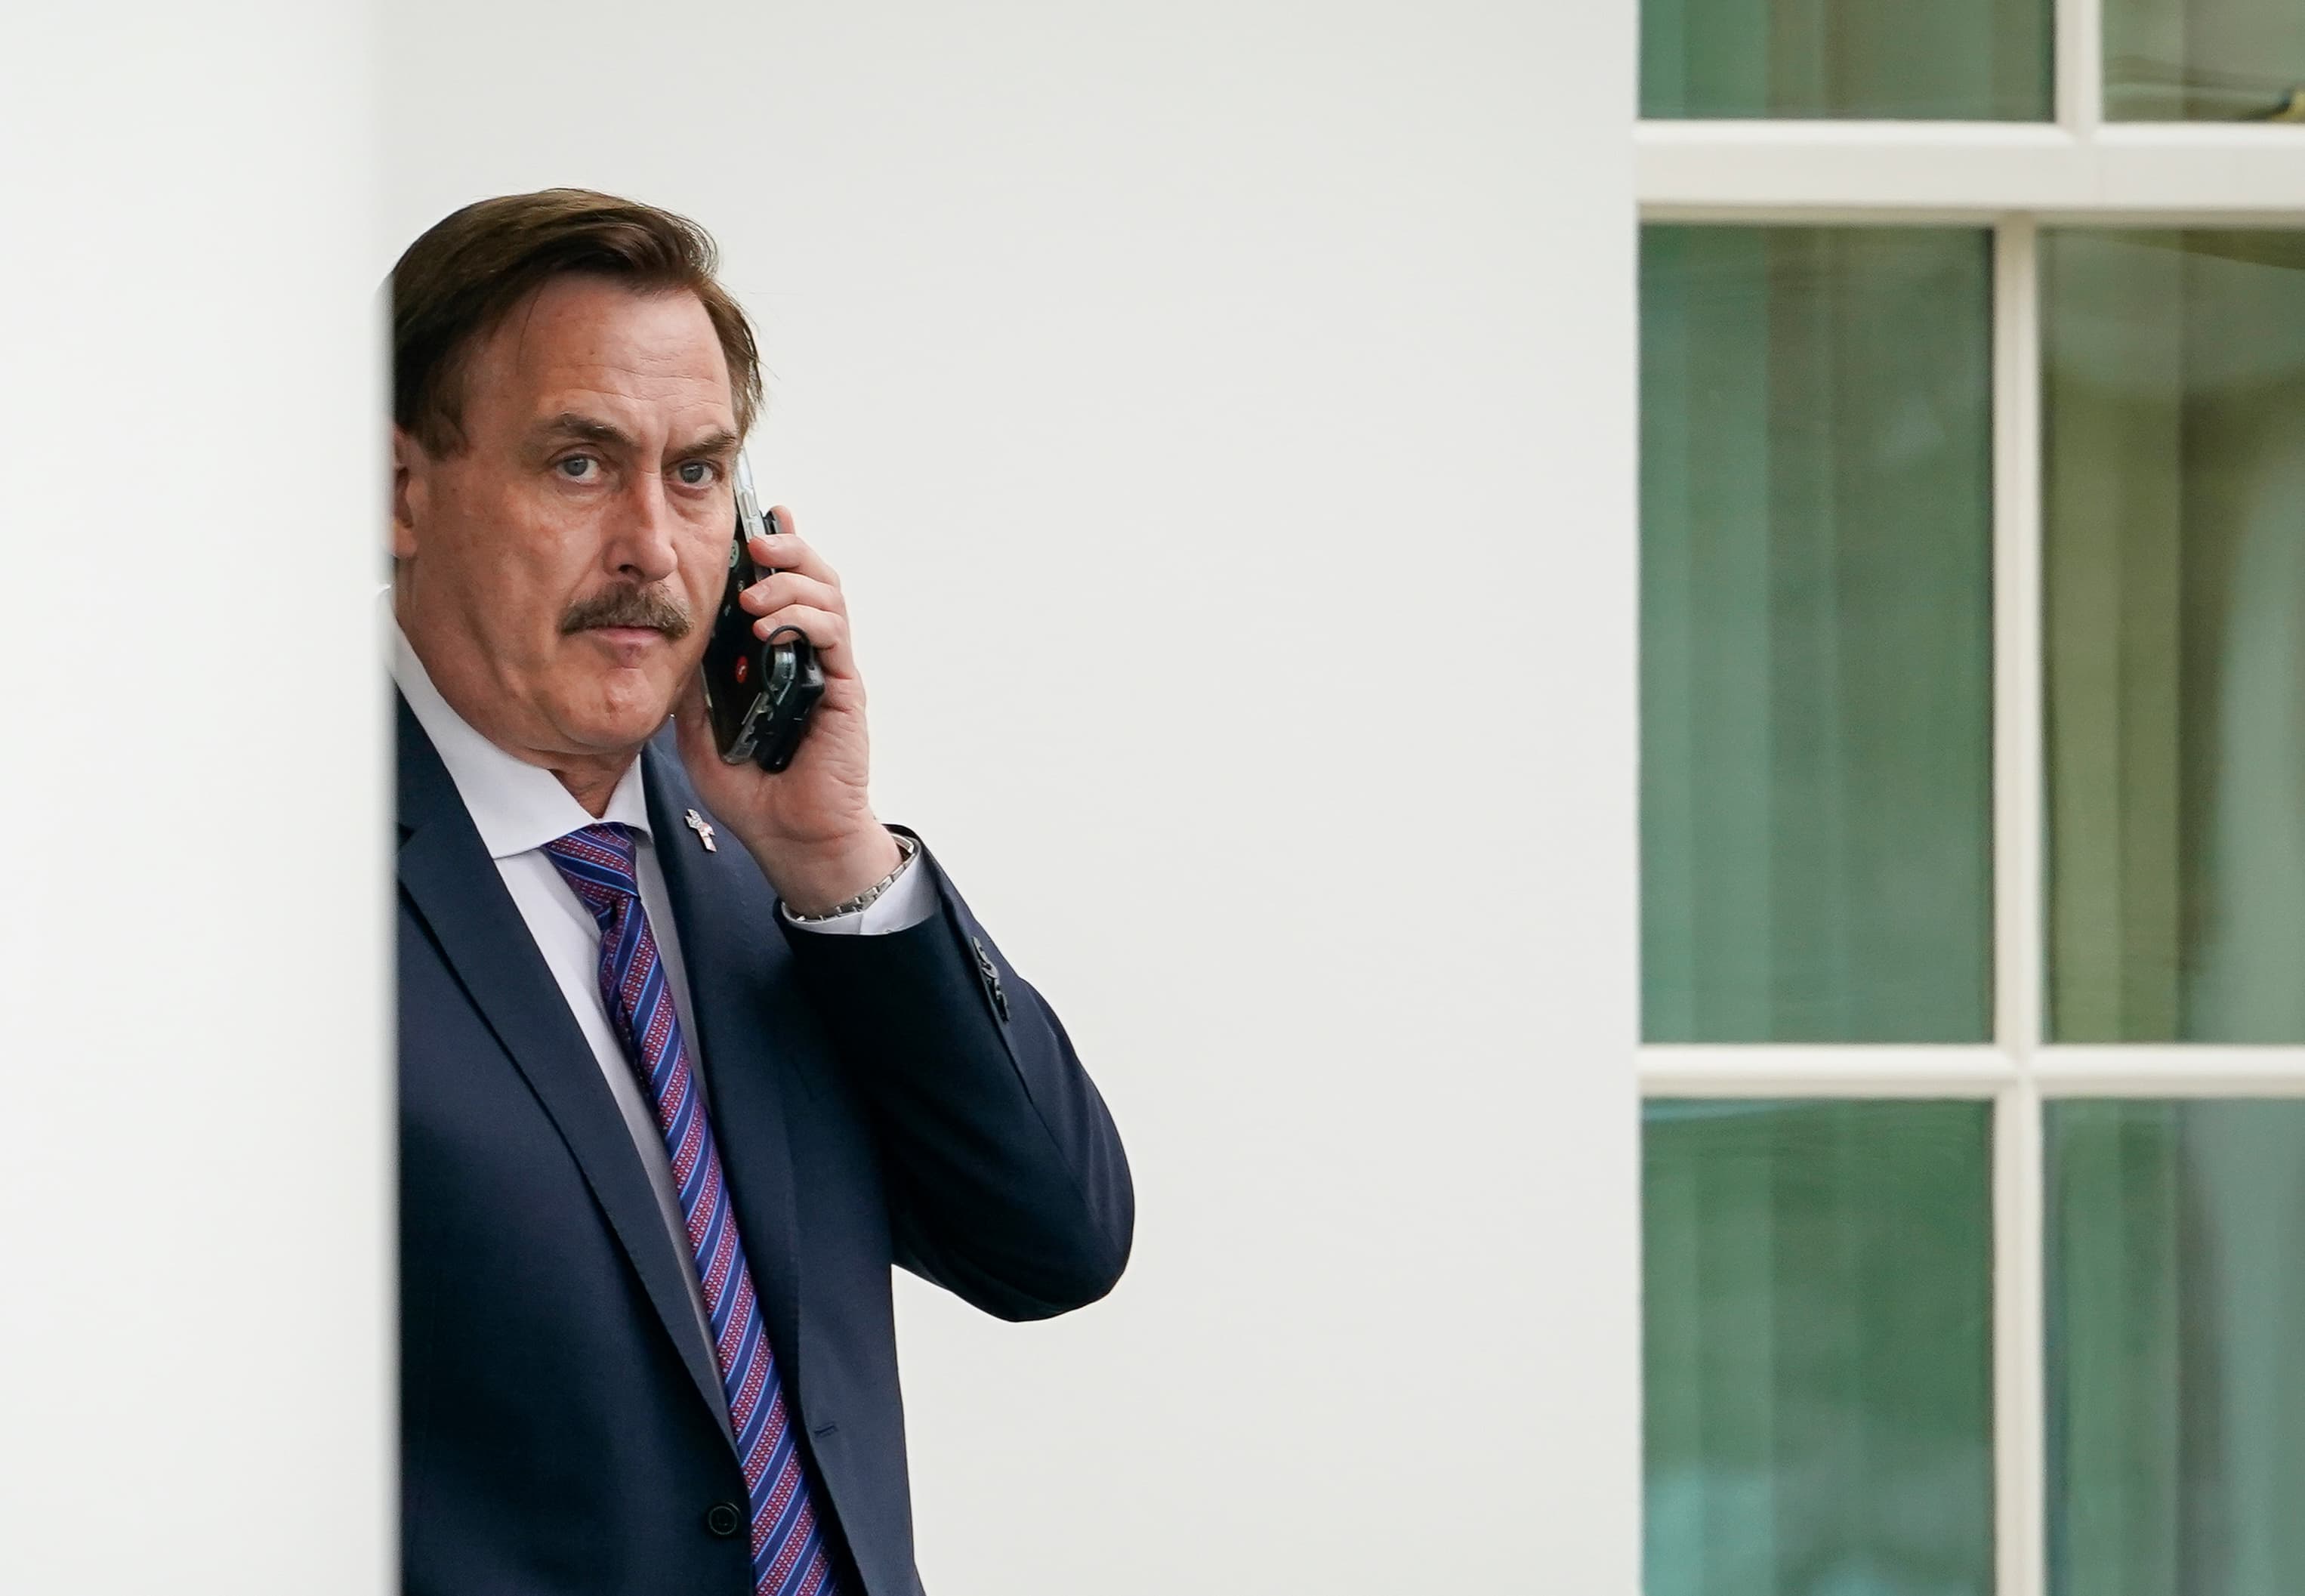 MyPillow Guy' Mike Lindell has run out of money, can't pay legal